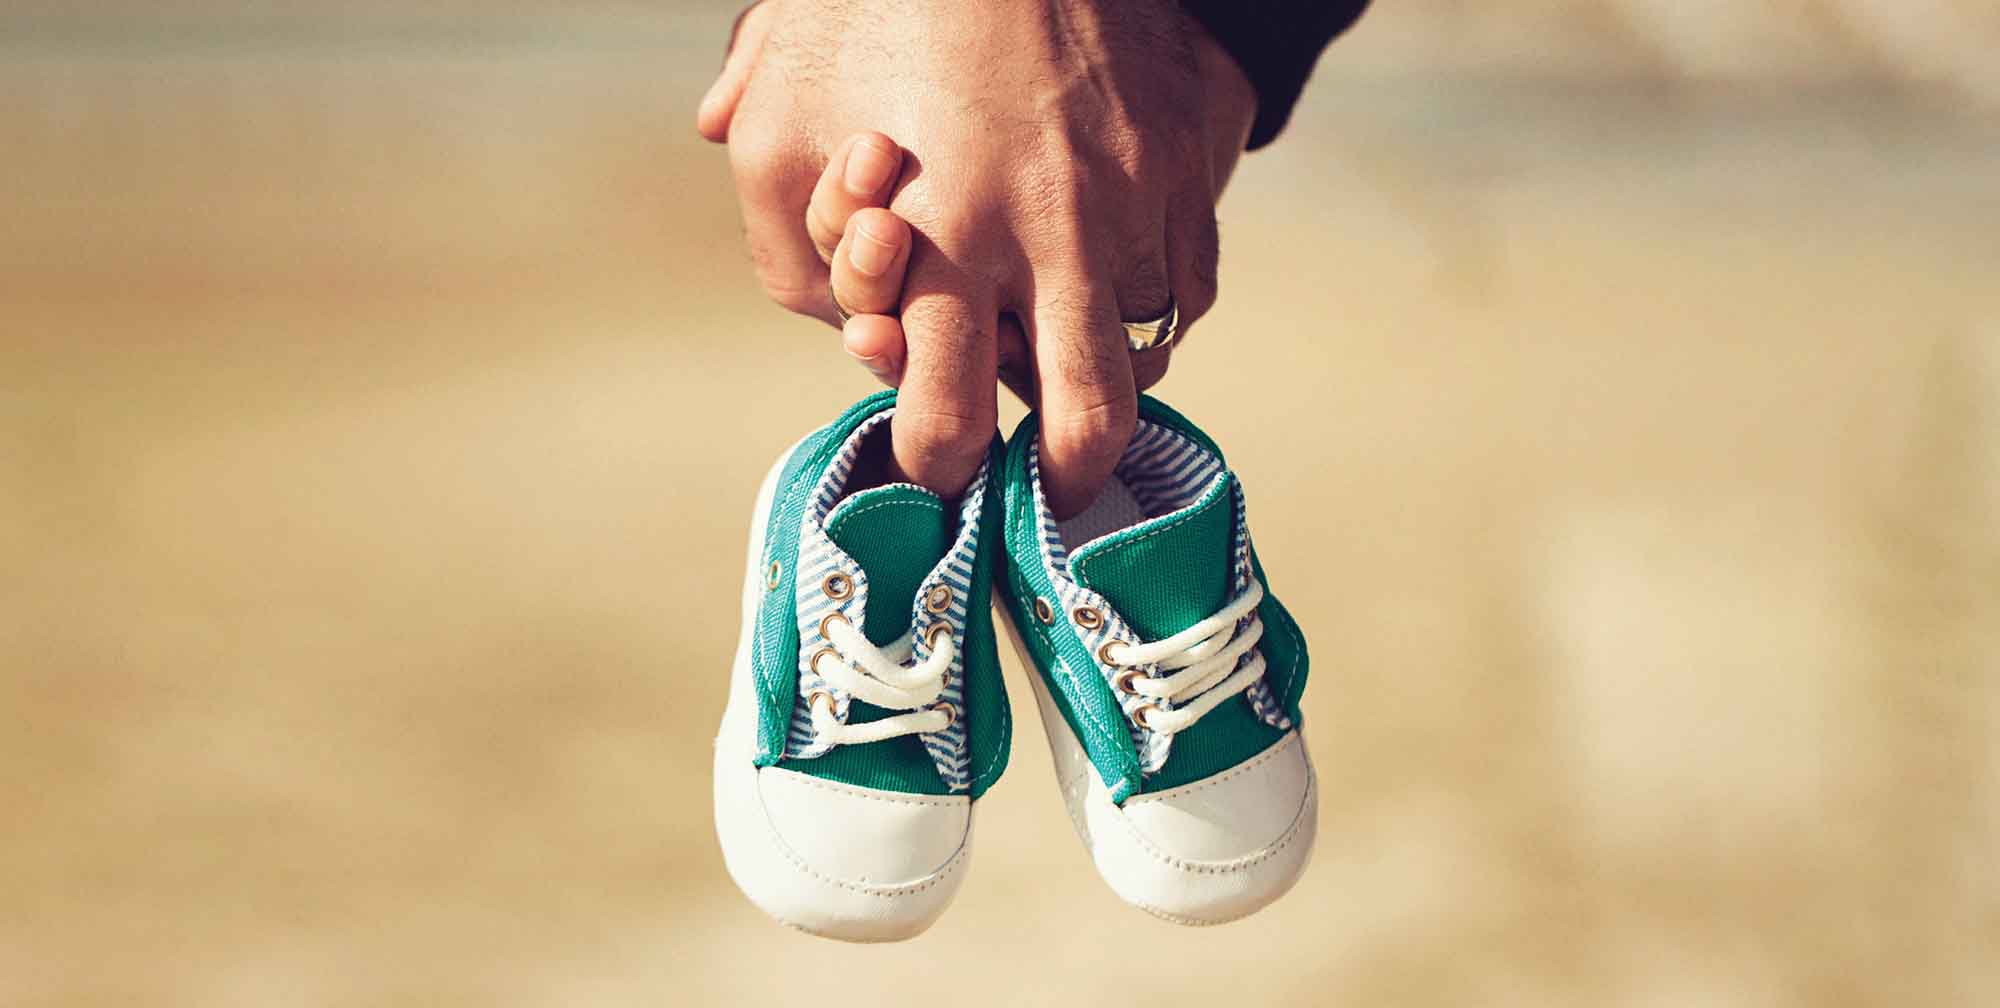 hands holding baby shoes